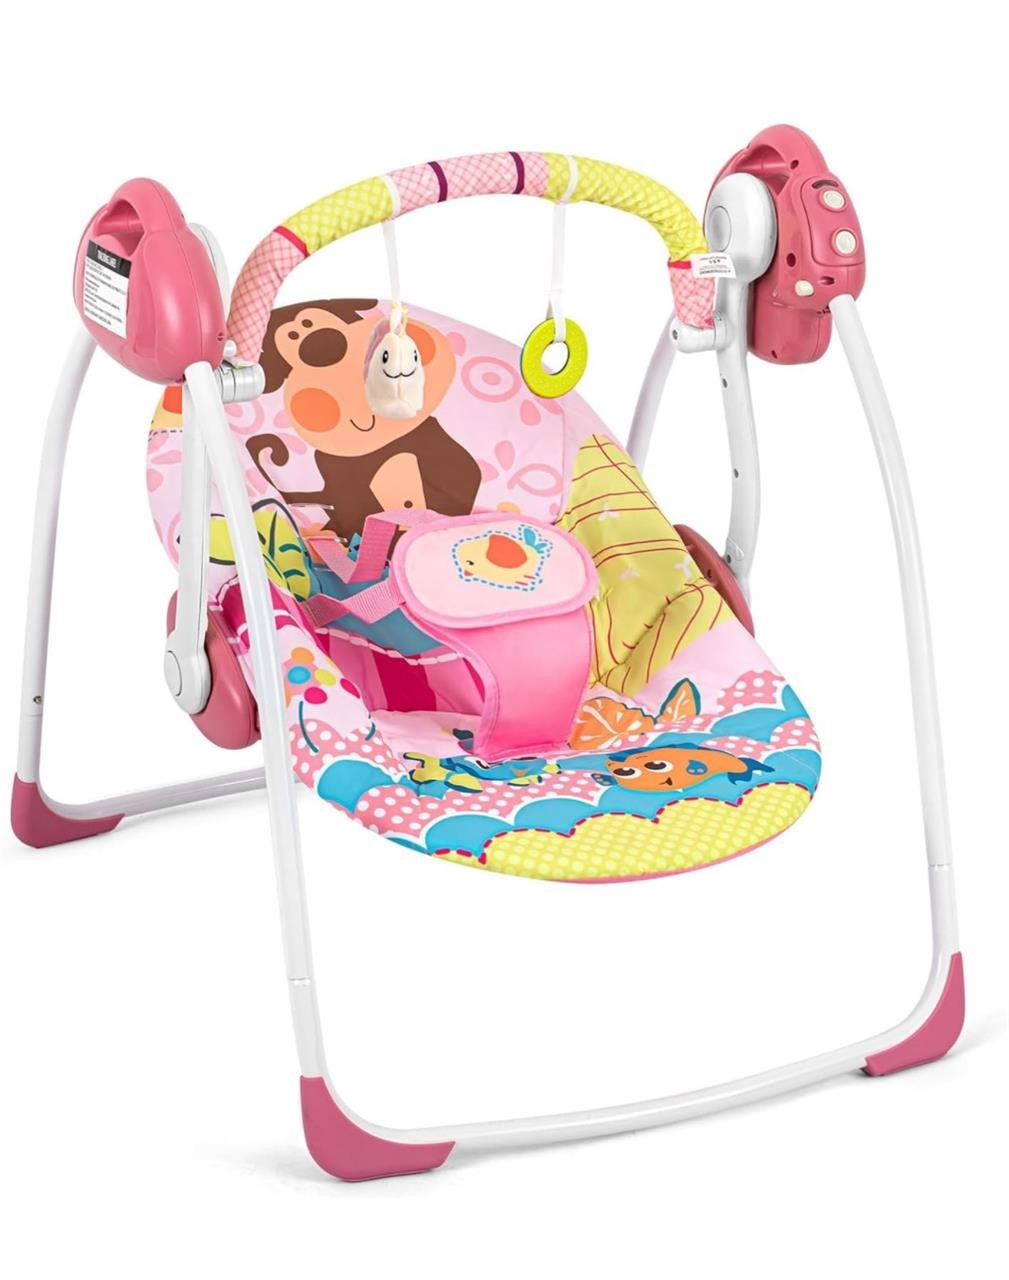 $68 Portable Baby Swings for Infants, Electric